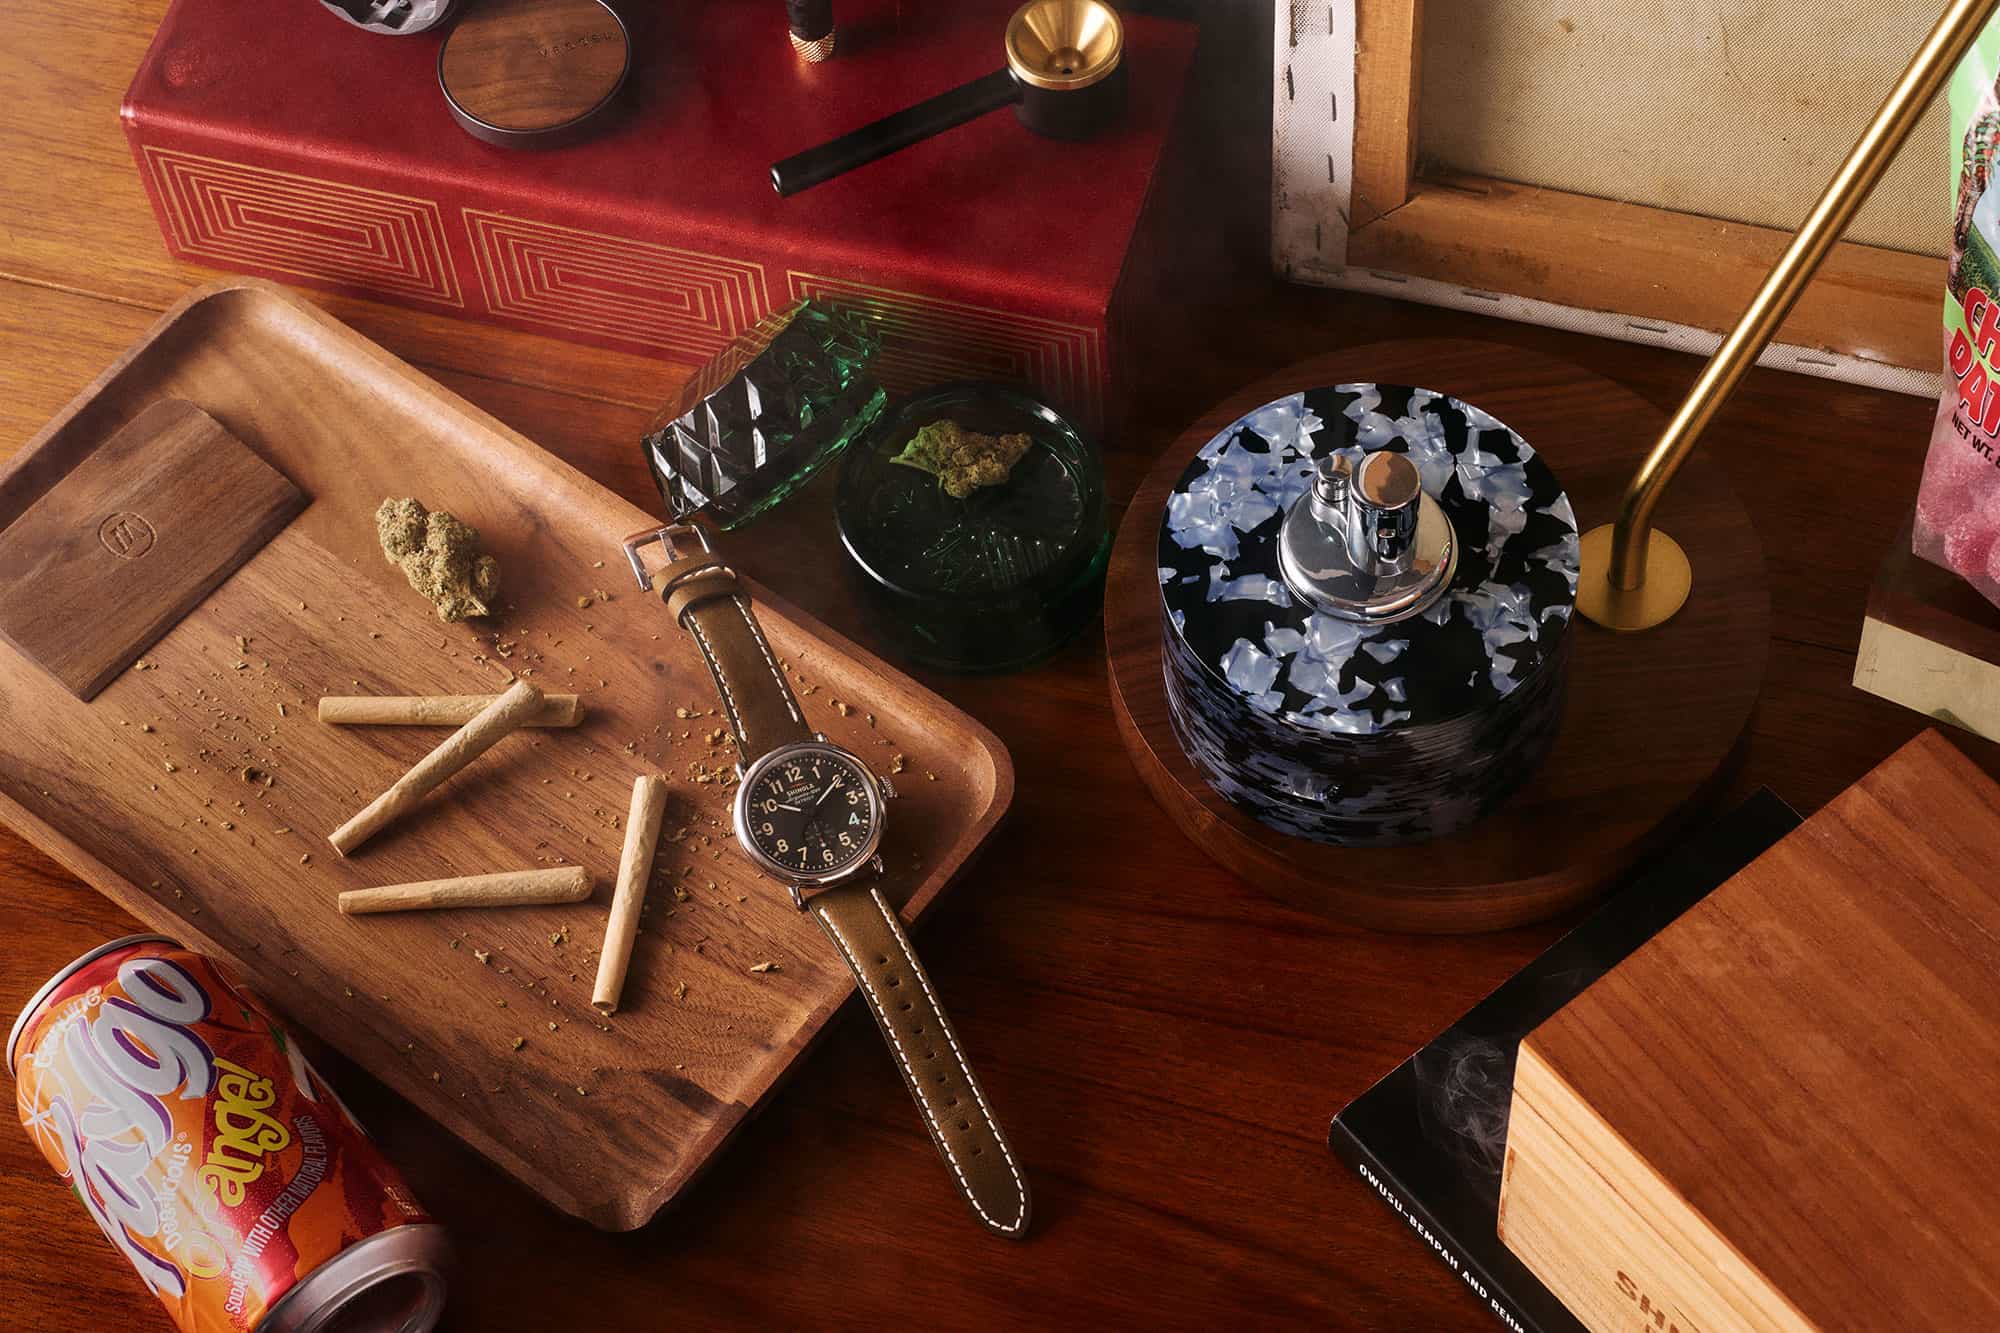 The Ultimate 4/20 Gift Guide Featuring the Limited Edition Shinola 420 Grassland Runwell